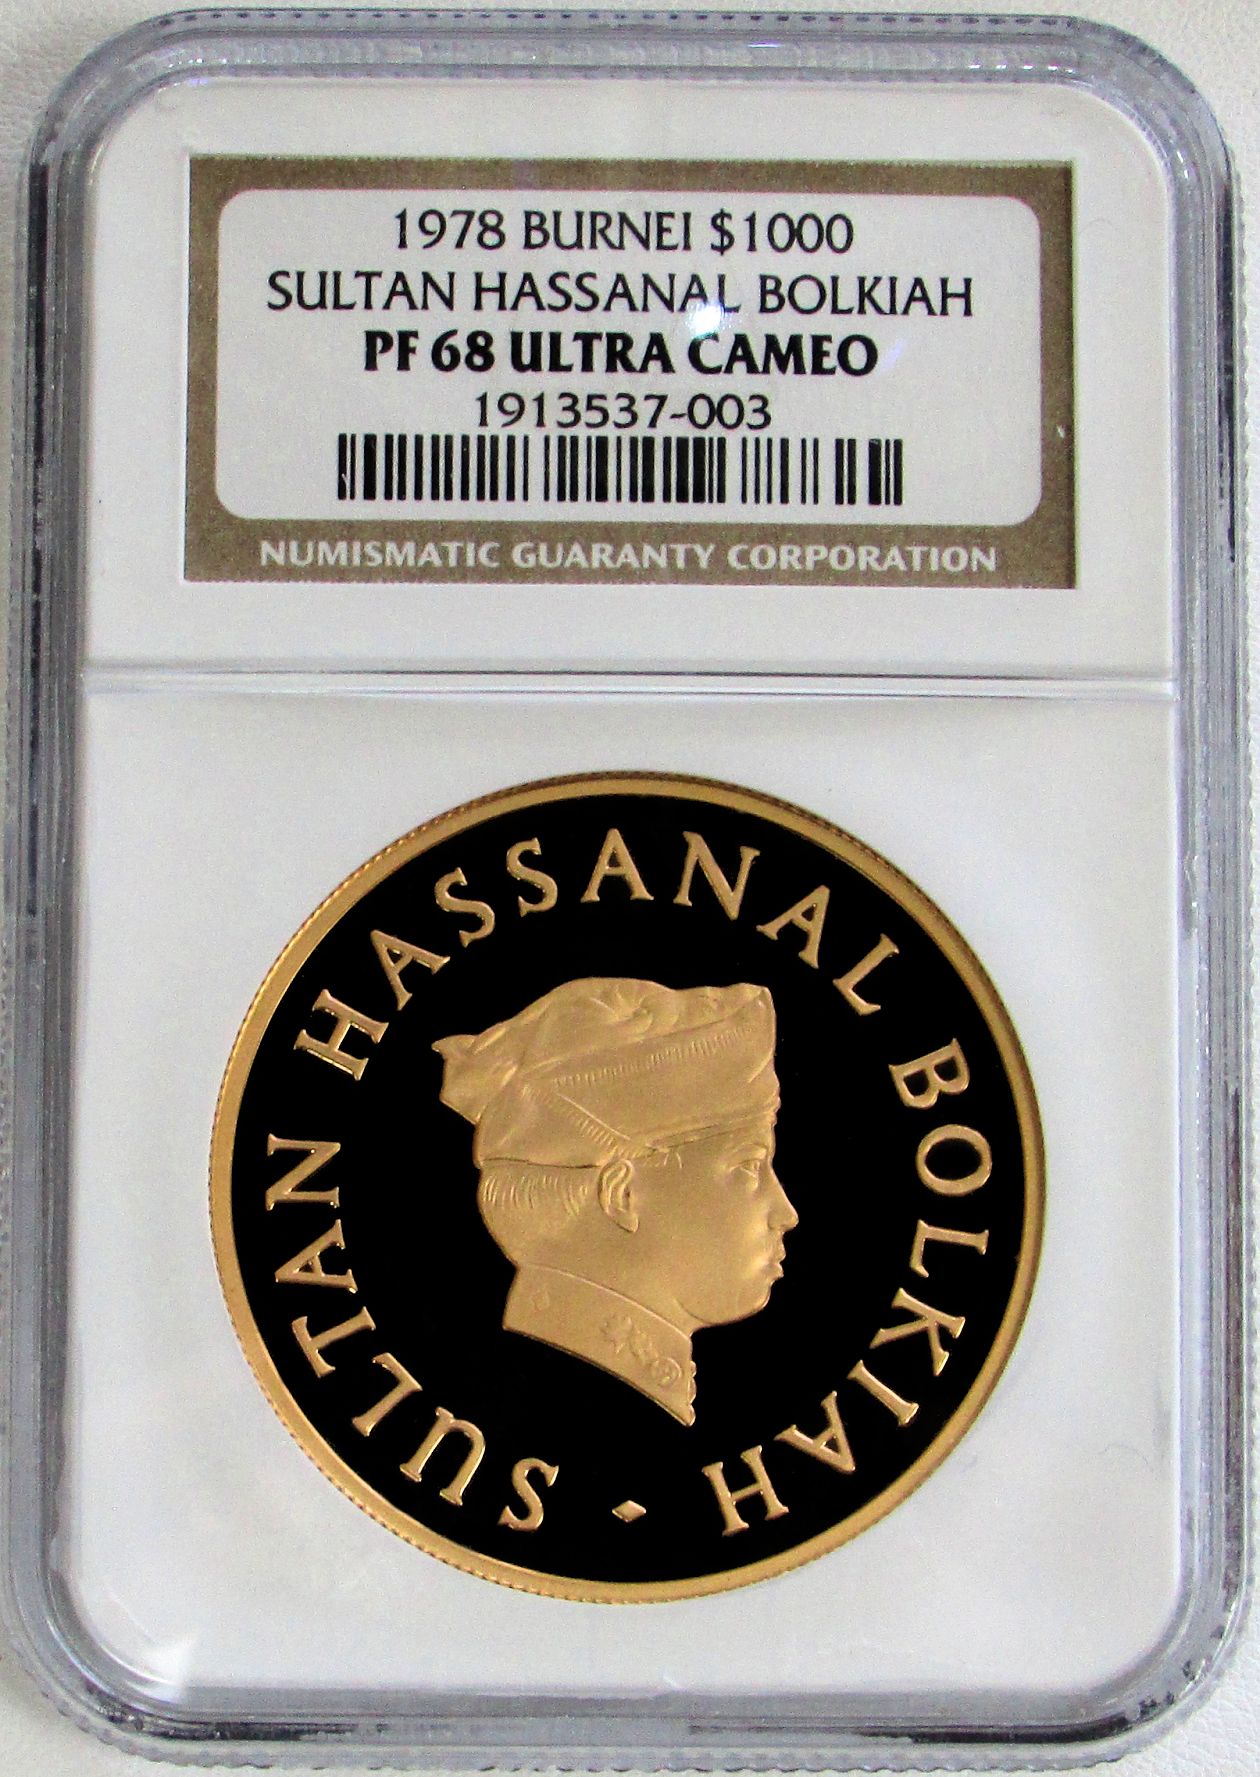 1978 GOLD BRUNEI $1000 NGC PROOF 68 ULTRA CAMEO "SULTAN OF BRUNEI" ONLY 1,000 MINTED